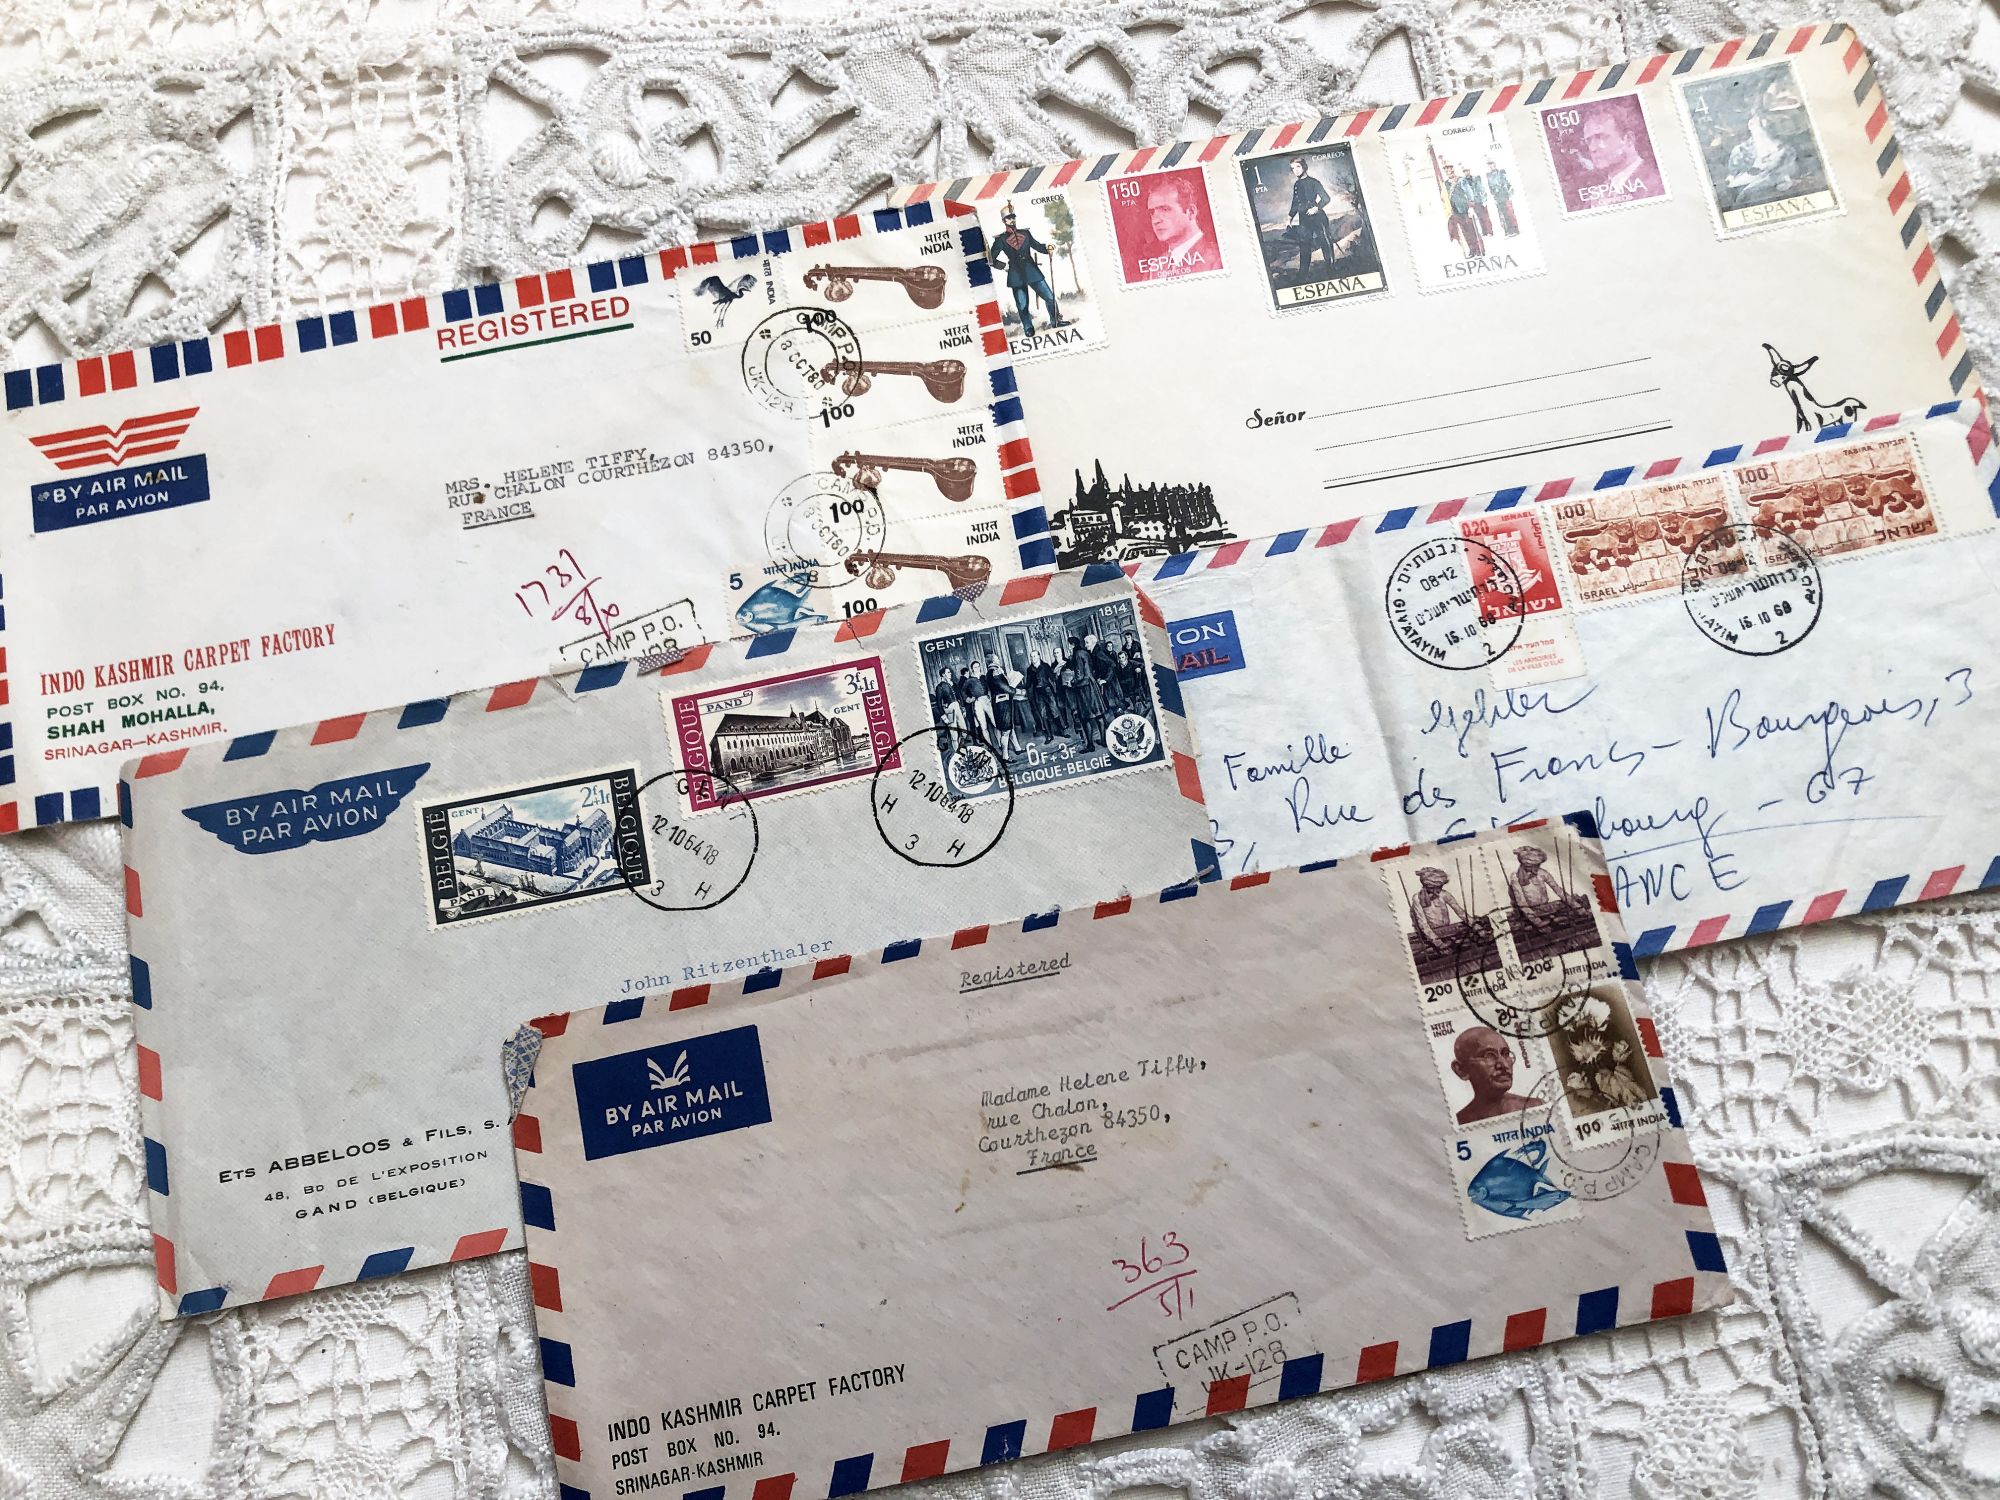 Five large air mail envelopes of different countries between the 1960s and 1980s